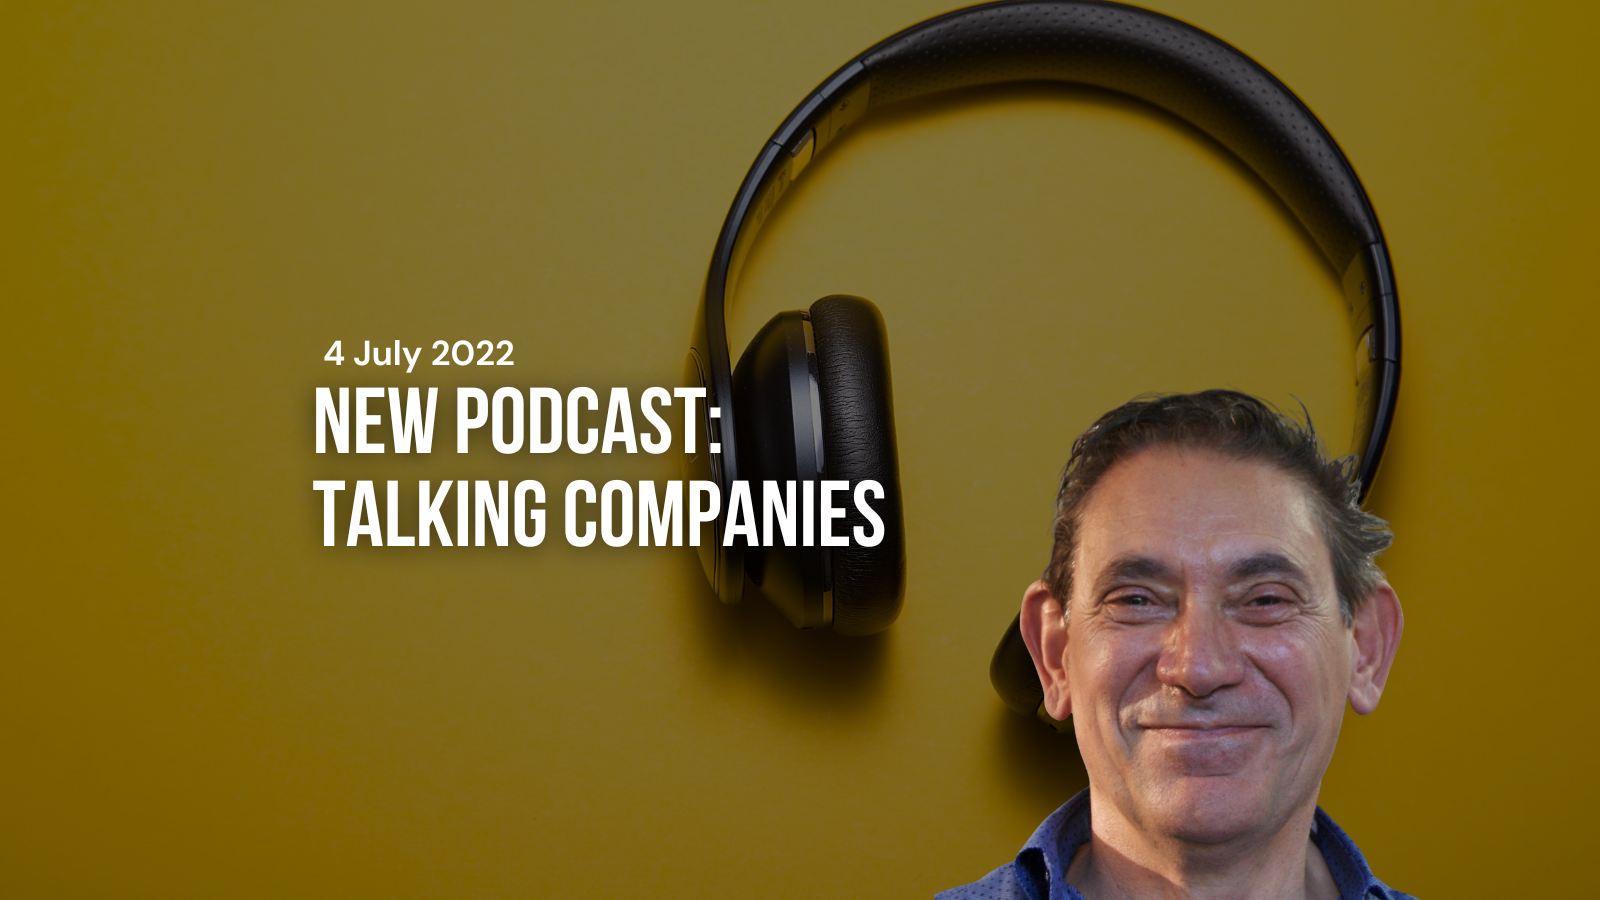 New Podcast: Talking Companies